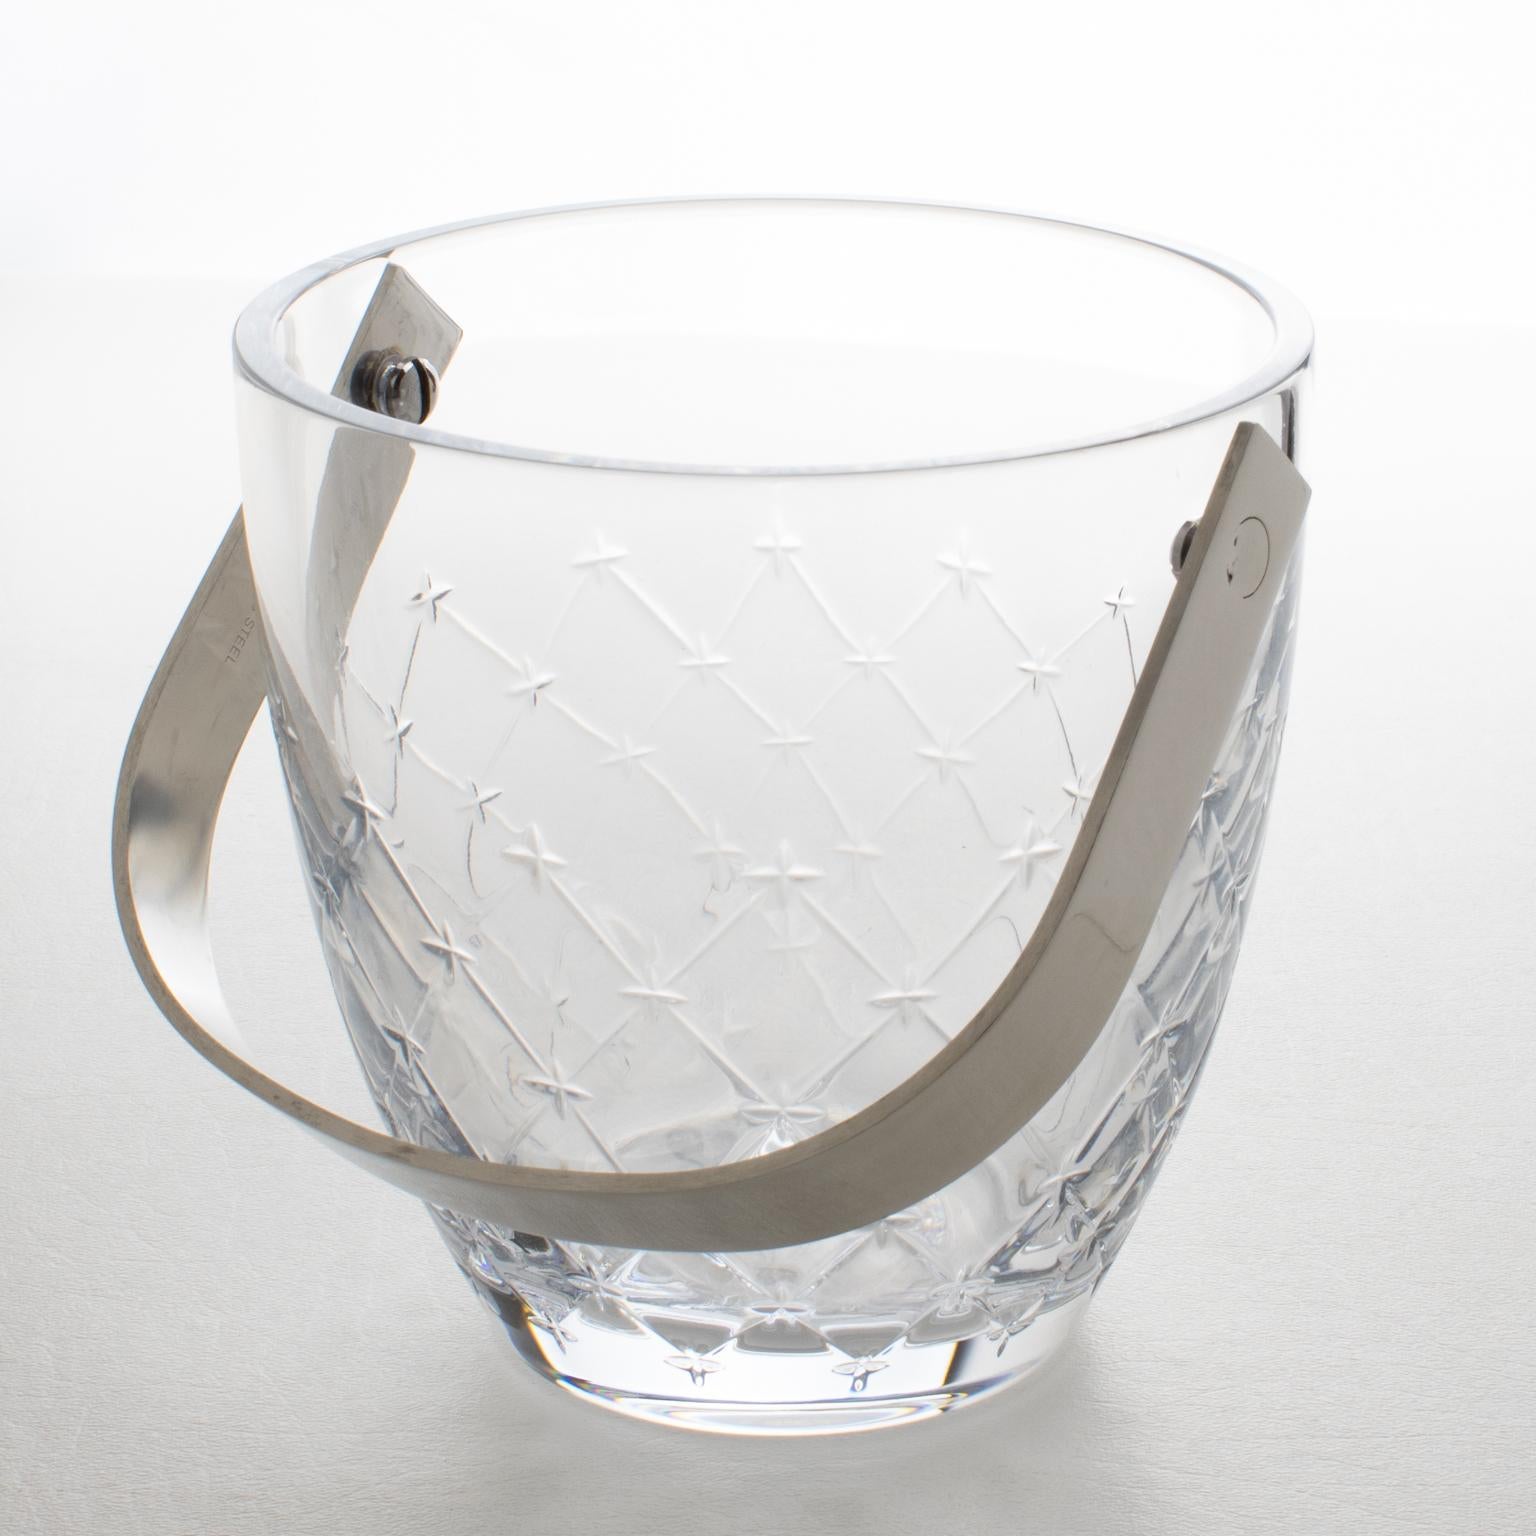 Christian Dior Ice Bucket Cooler Etched Crystal and Stainless Steel 5